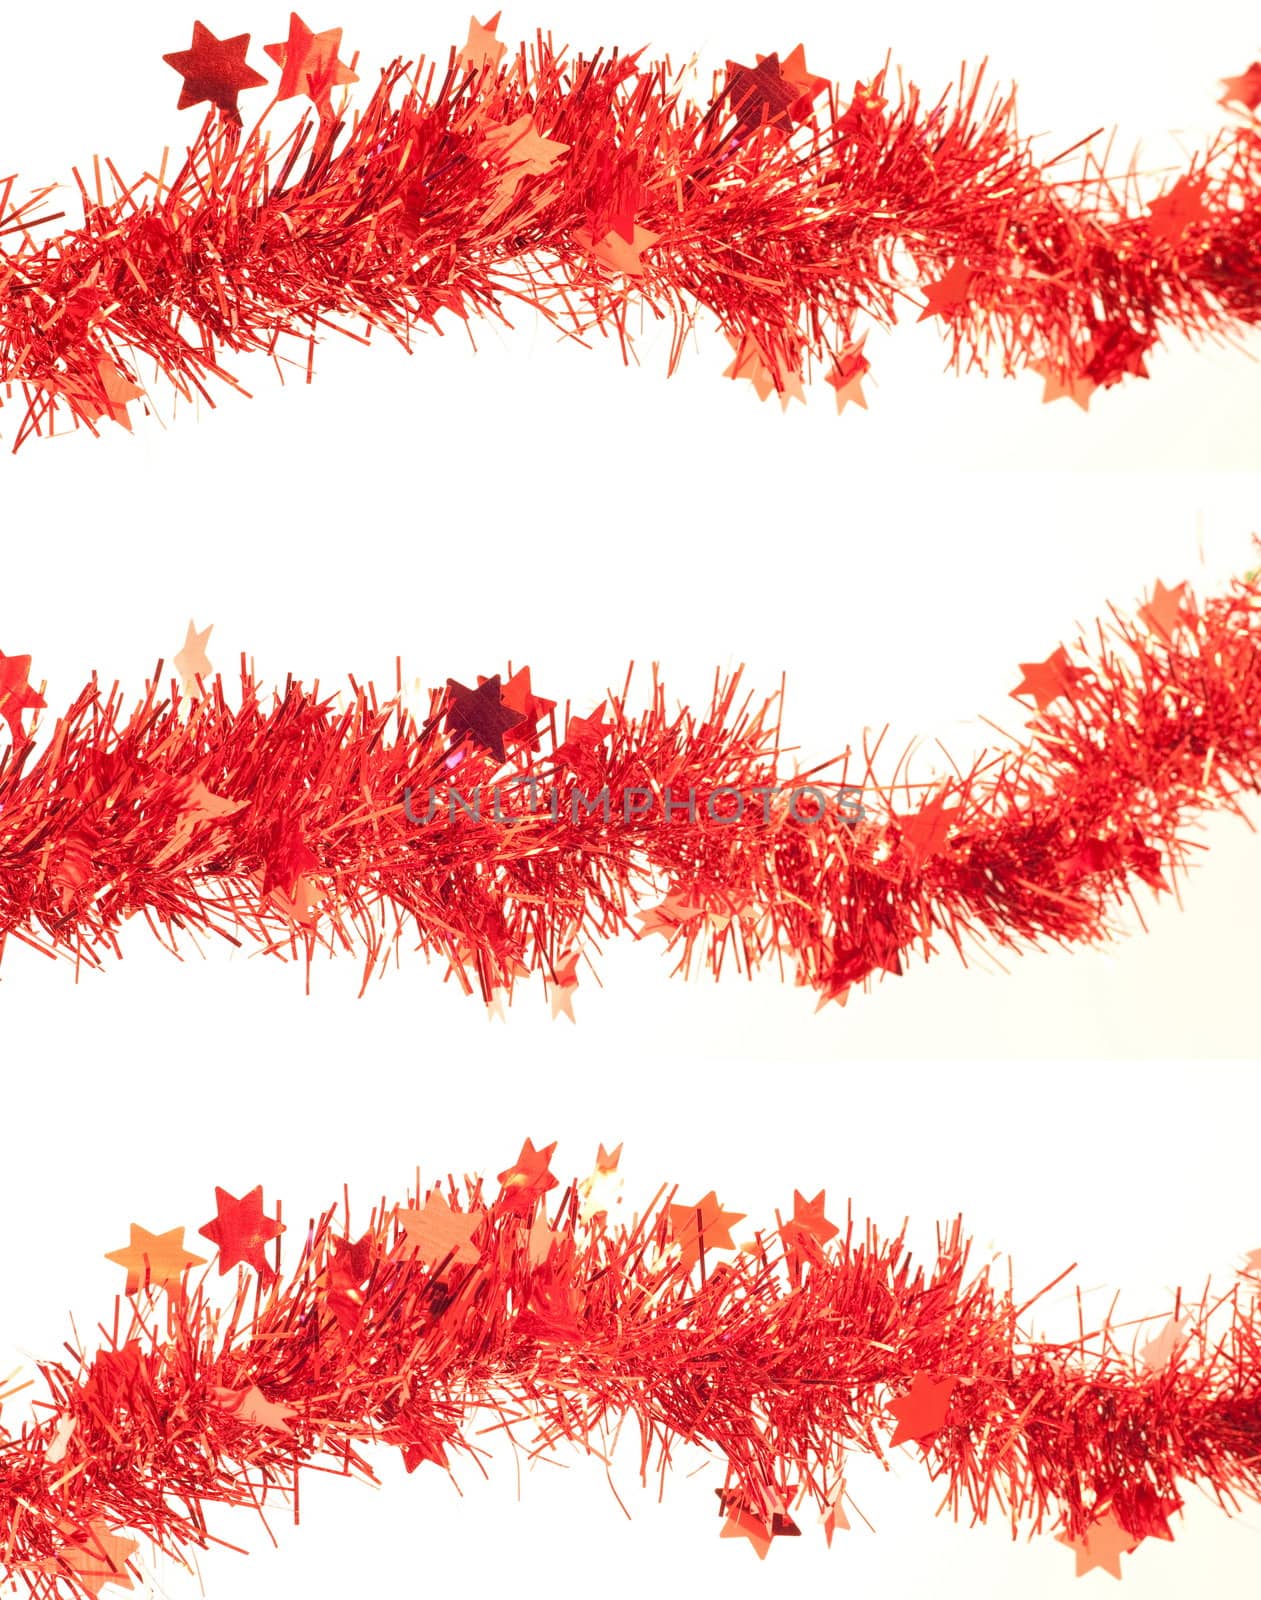  	Happy holidays, red garlands over whithe background by Arsen